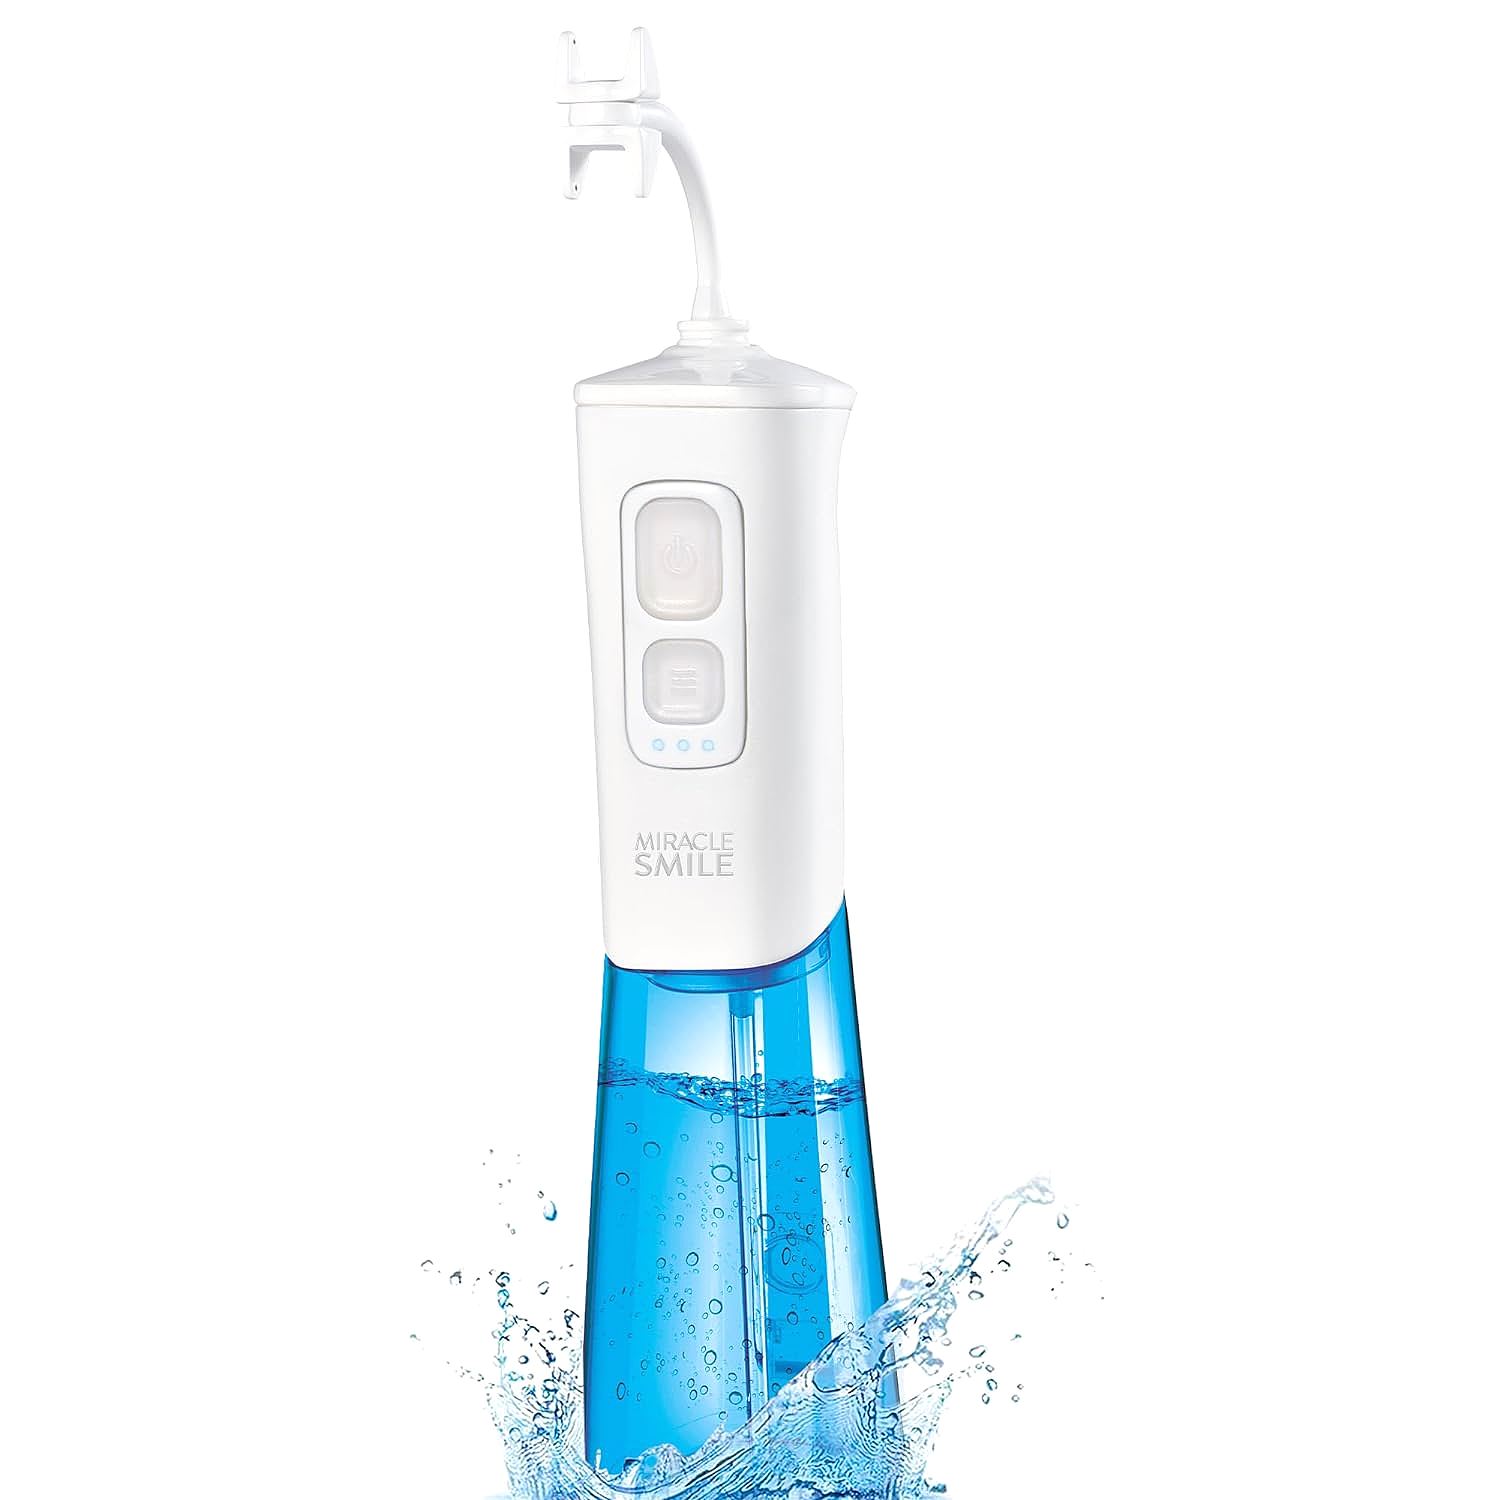 Ontel MCSMLDX-MO12 Miracle Smile Water Flosser: A Revolutionary Cordless Water Flosser for Complete Dental Care